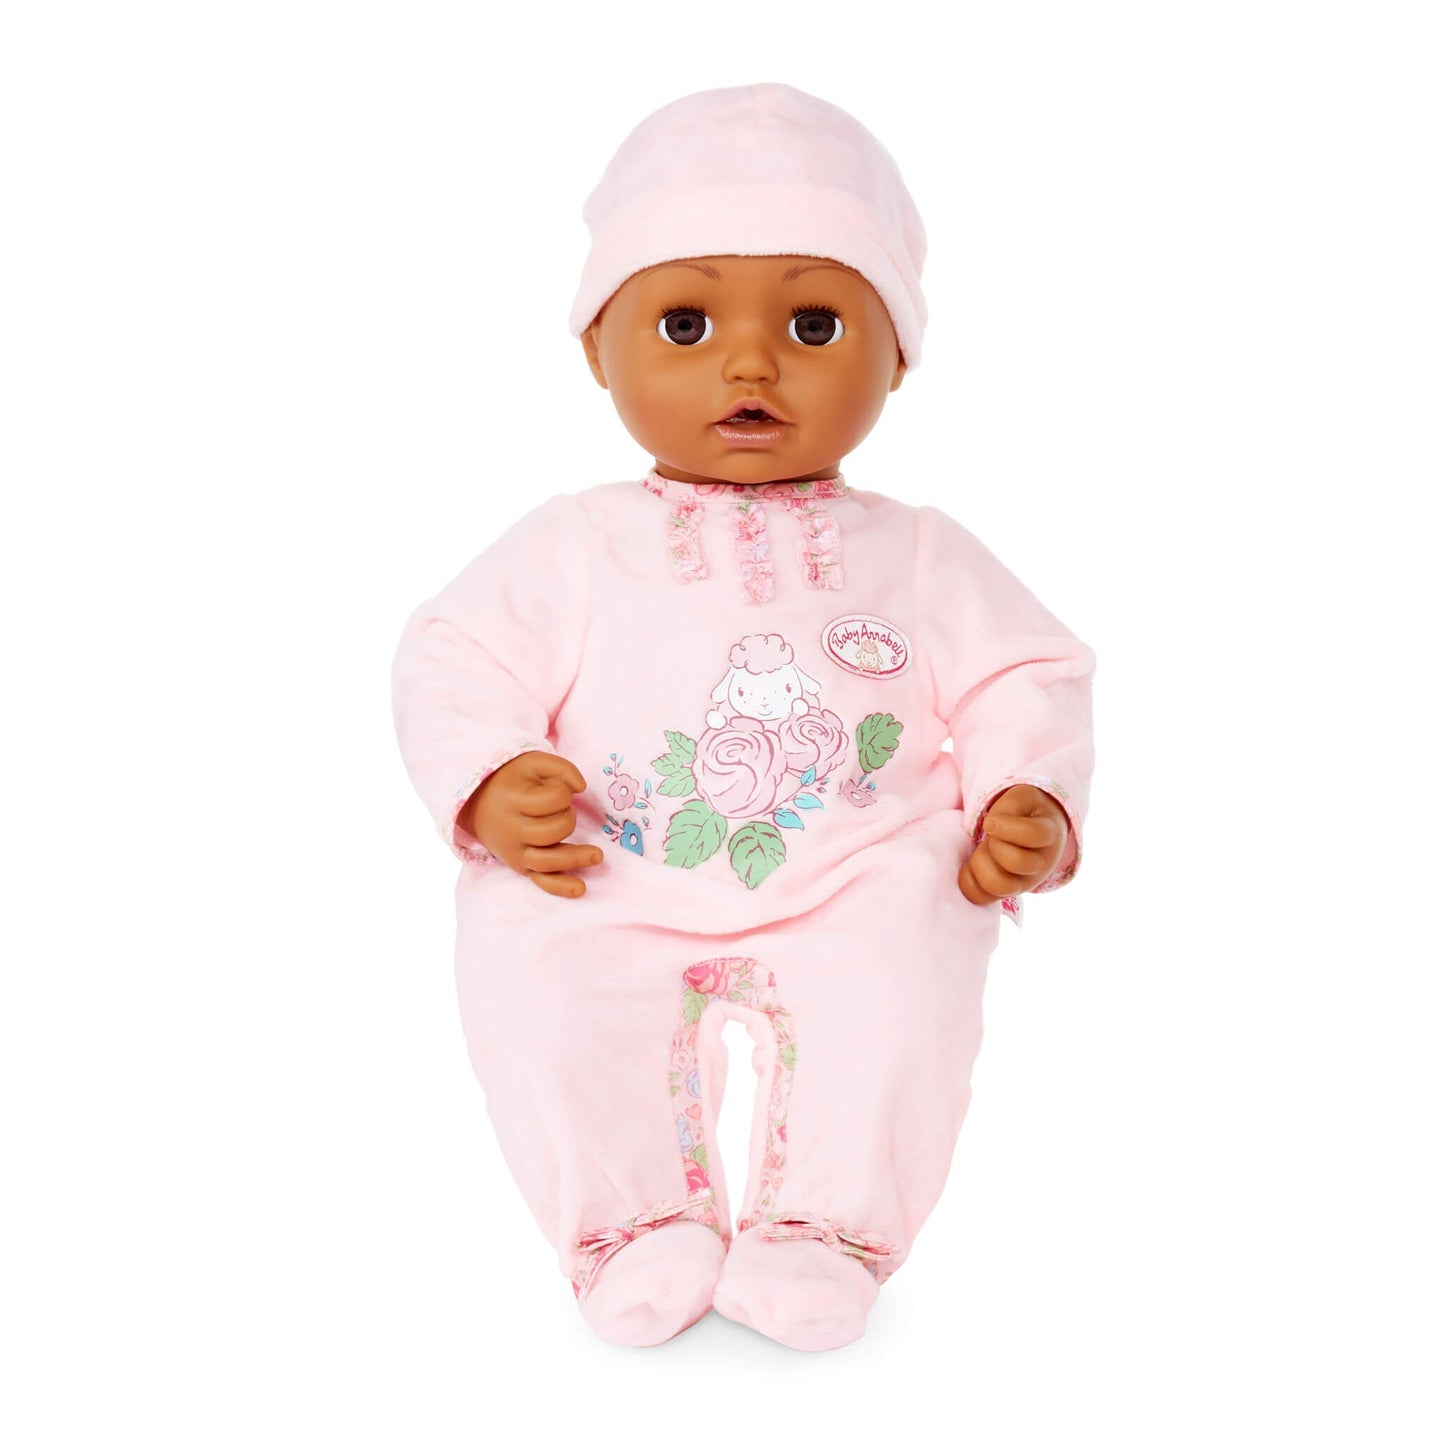 BABY born Baby Annabell Doll with Brown Eyes